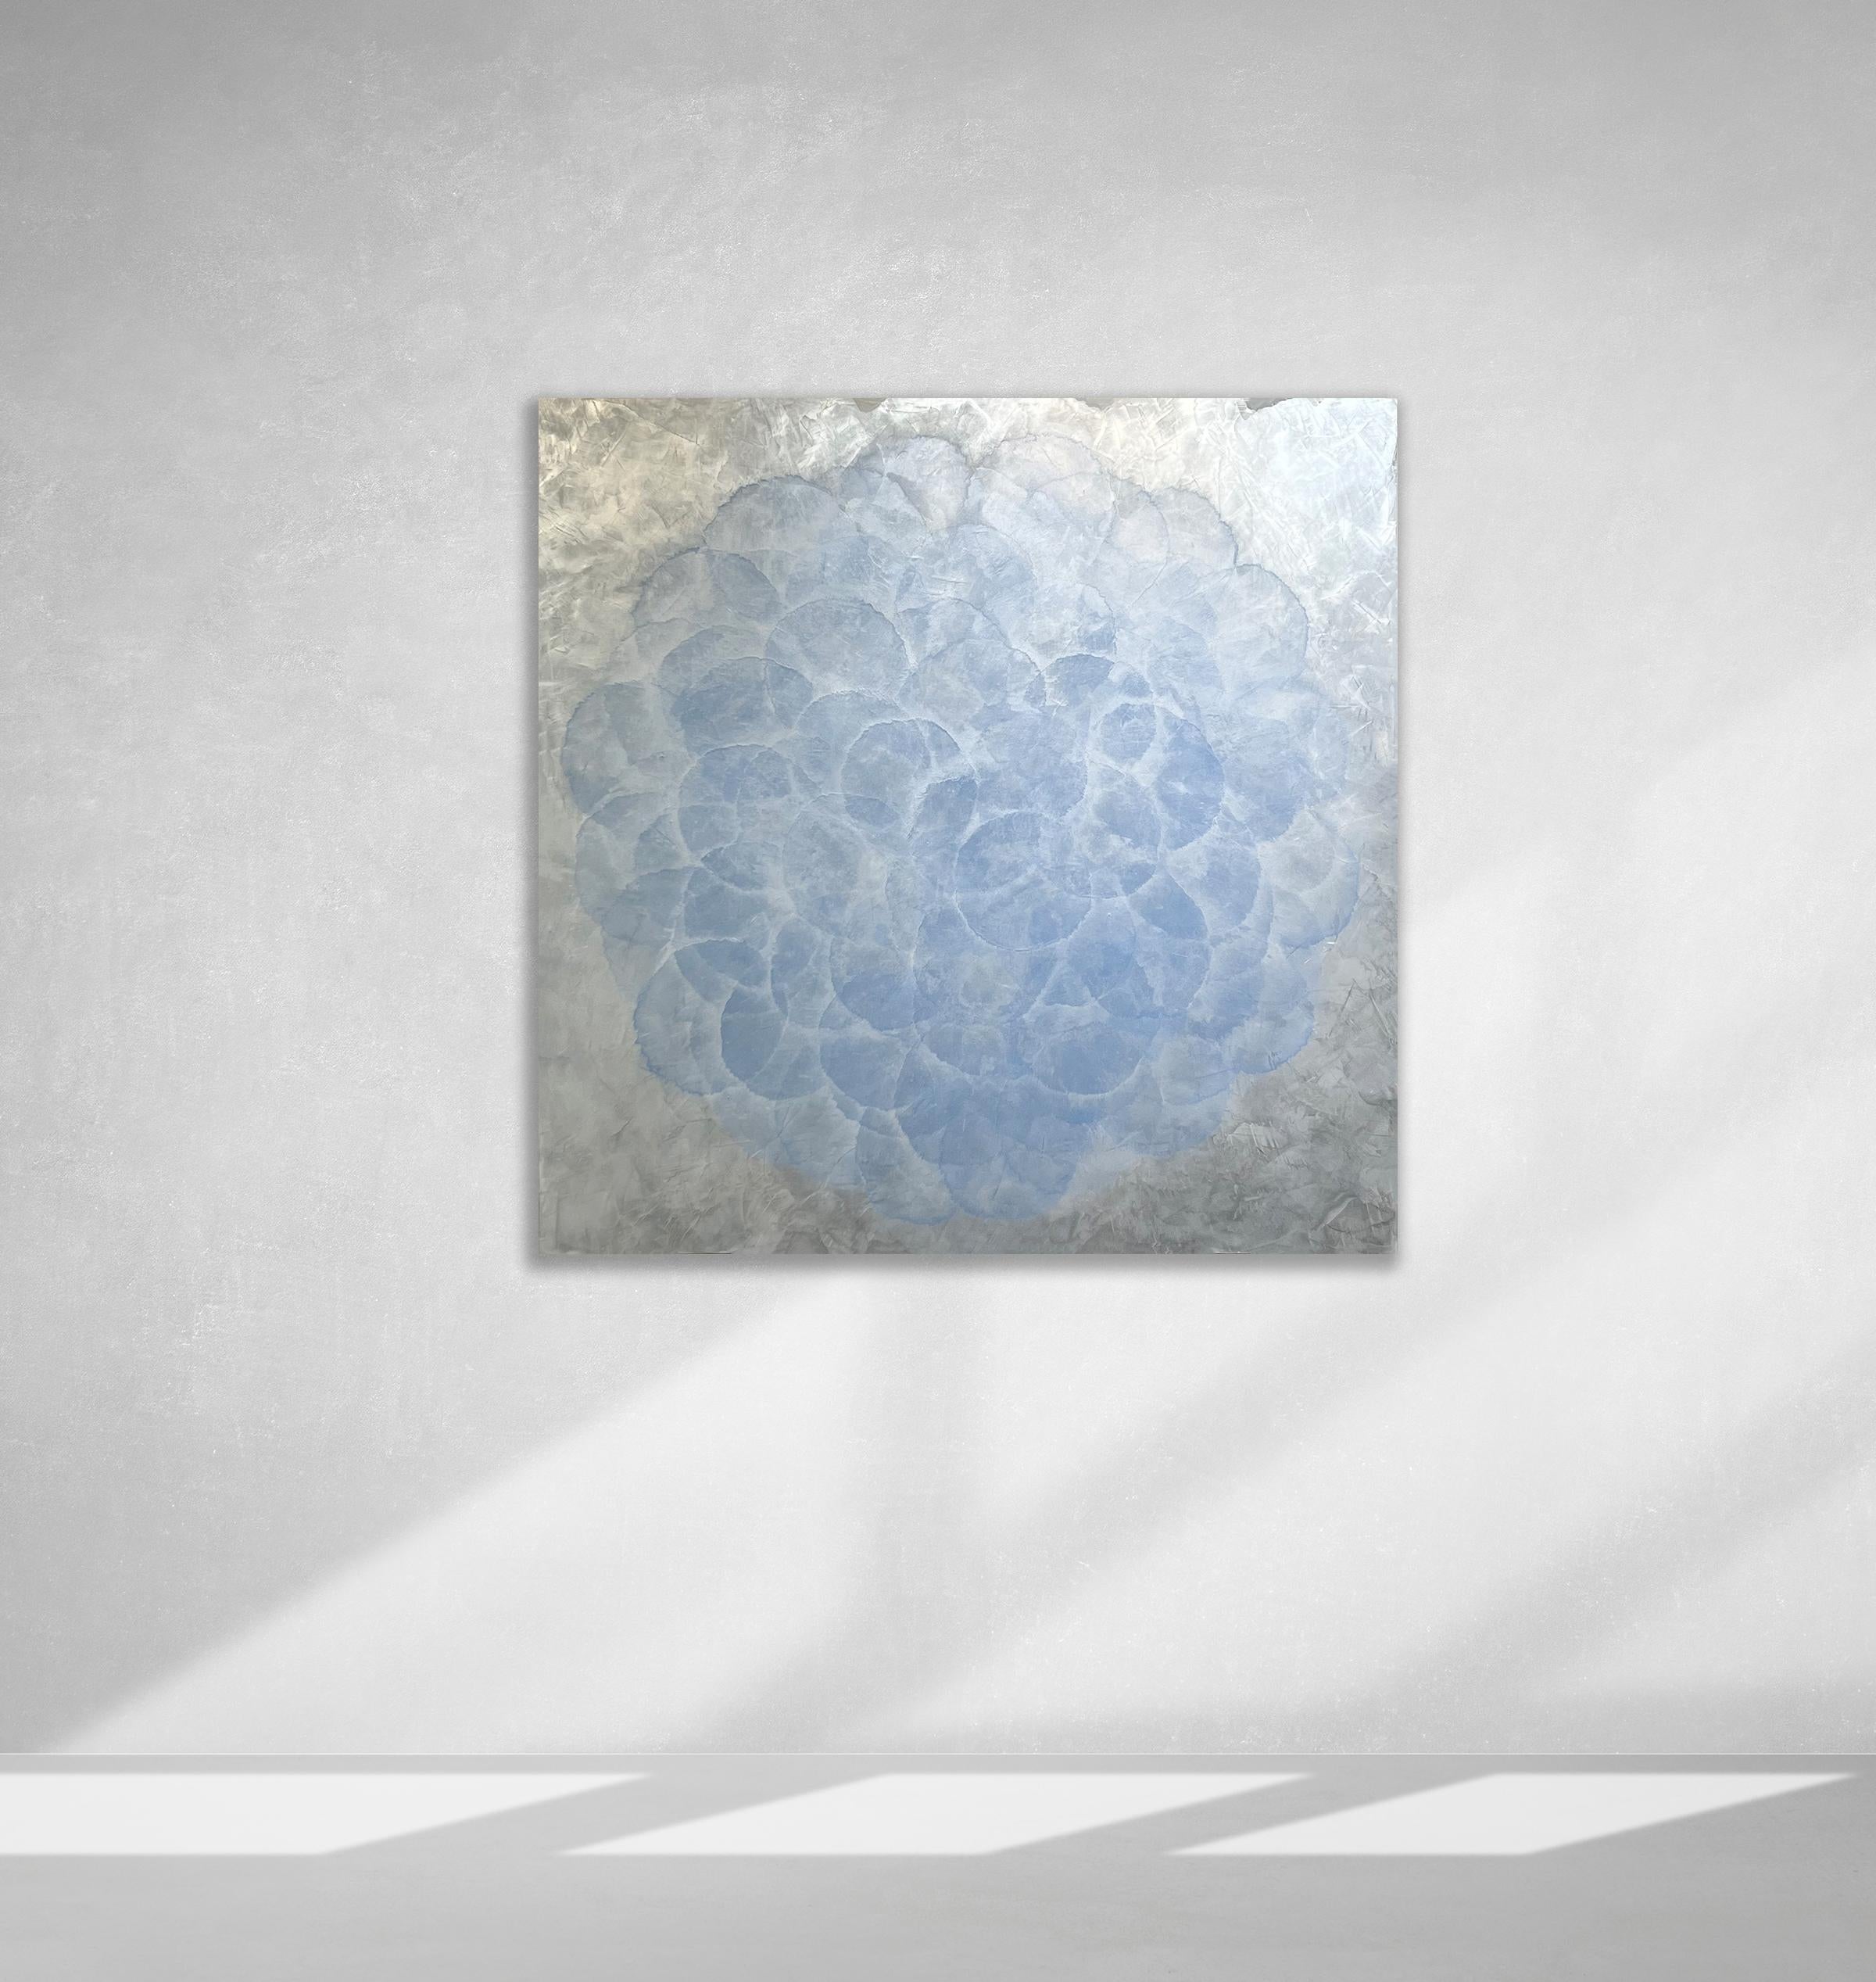 This abstract painting by Roger Mudre is made with acrylic paint over metal leaf on panel. It features nearly opaque light blue circles, arranged in an overlapping pattern to create a larger circle shape. The outer layer of the circle blends into